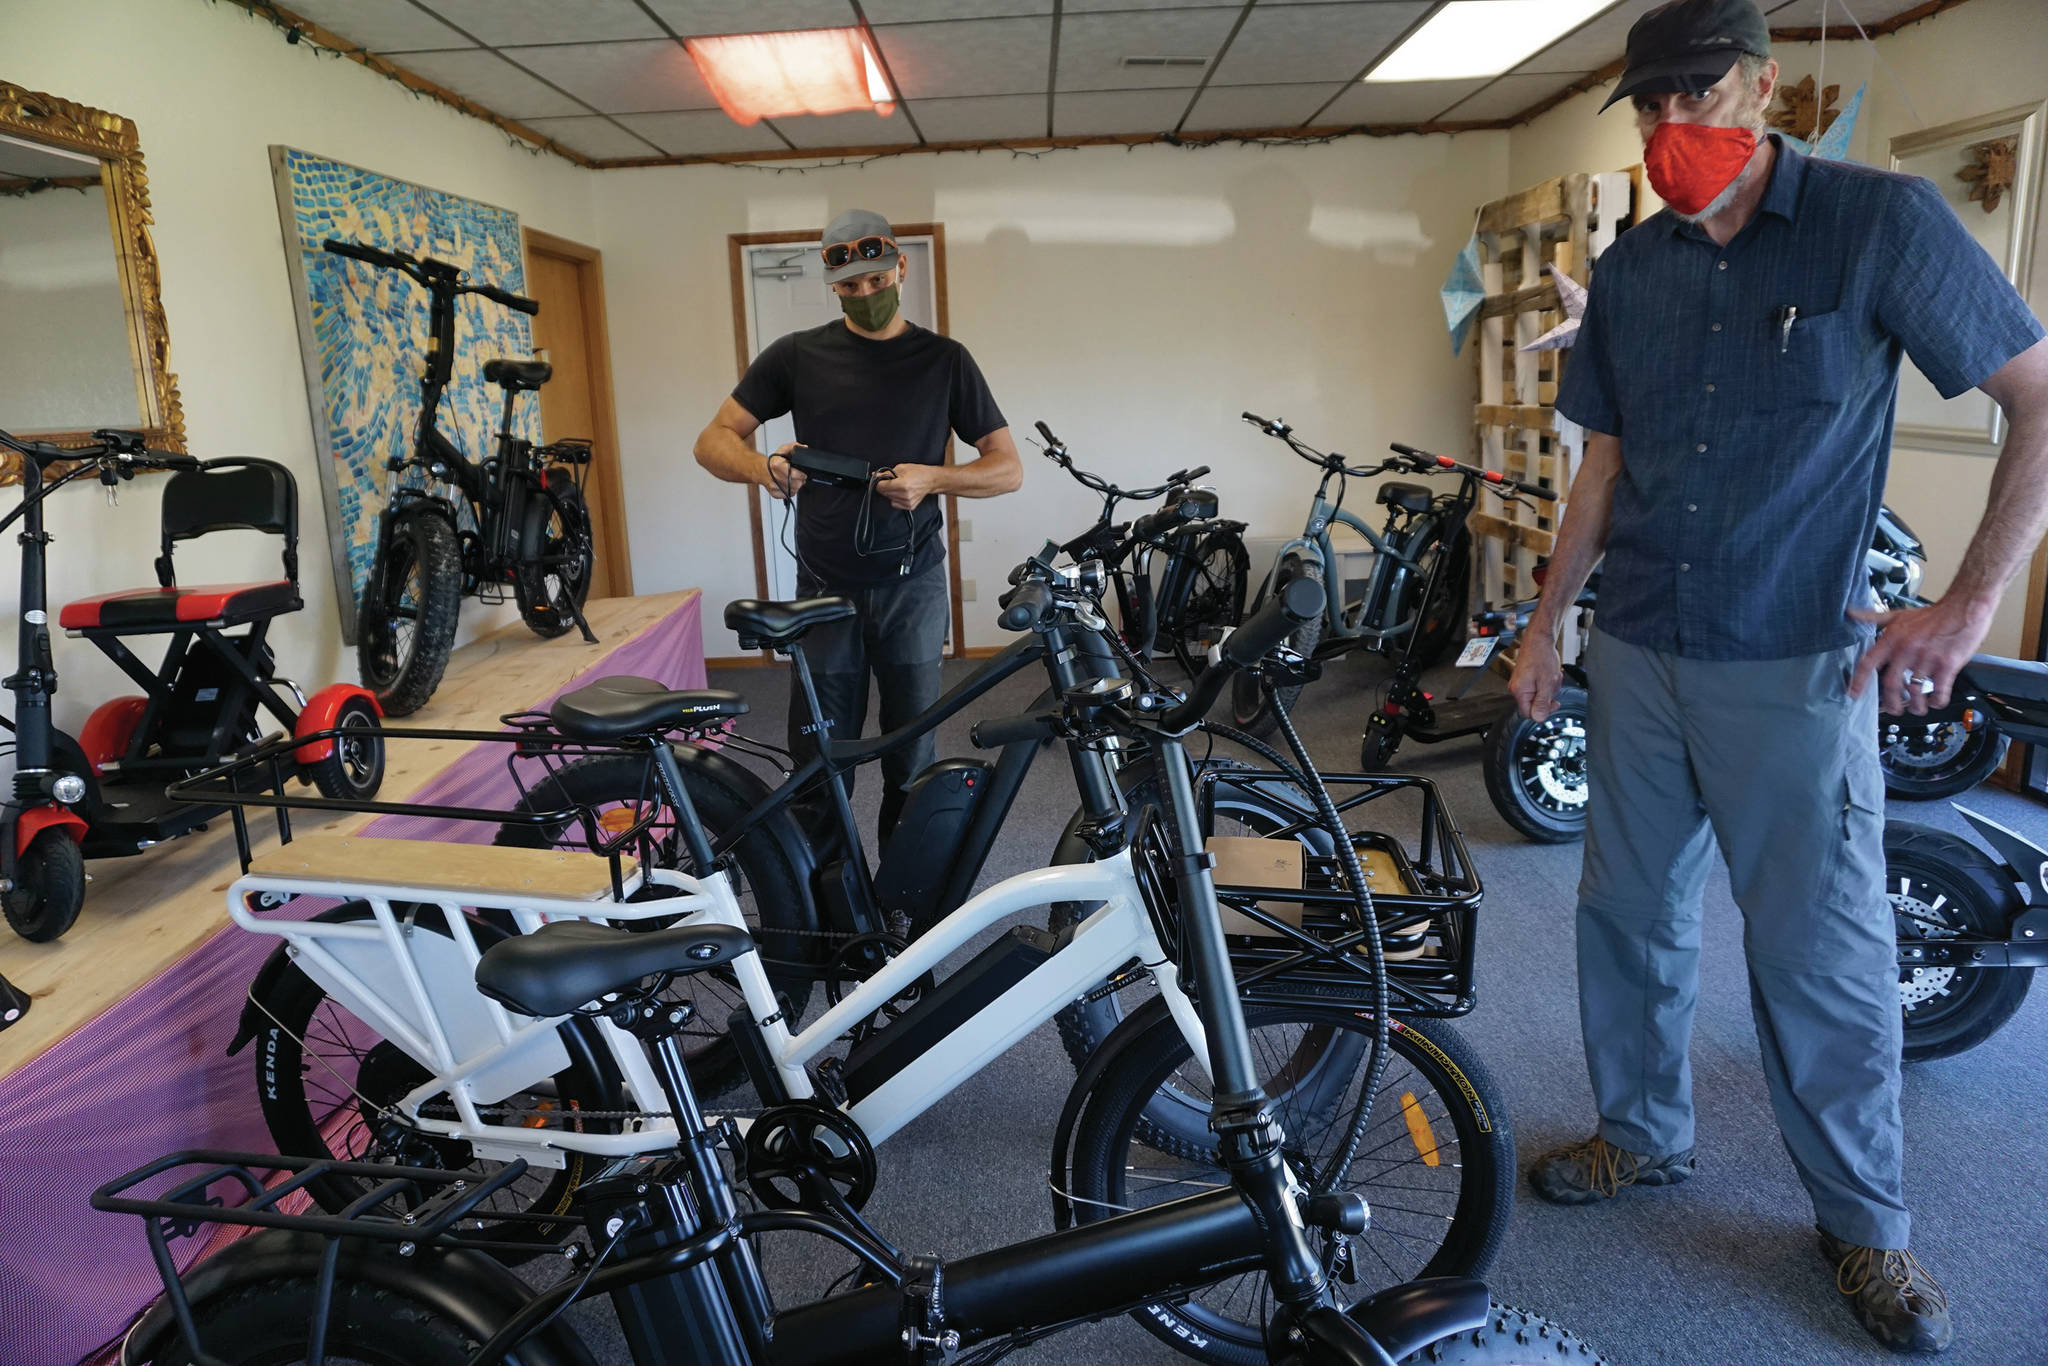 Dale Banks, right, owner of LoopEride, and Chase Warren, right, LoopEride mechanic, display some of the electric-motor assist bicycles at an open house held Friday, Aug. 21, 2020, at the company showroom on East Bunnell Avenue in Homer, Alaska. (Photo by Michael Armstrong/Homer News)